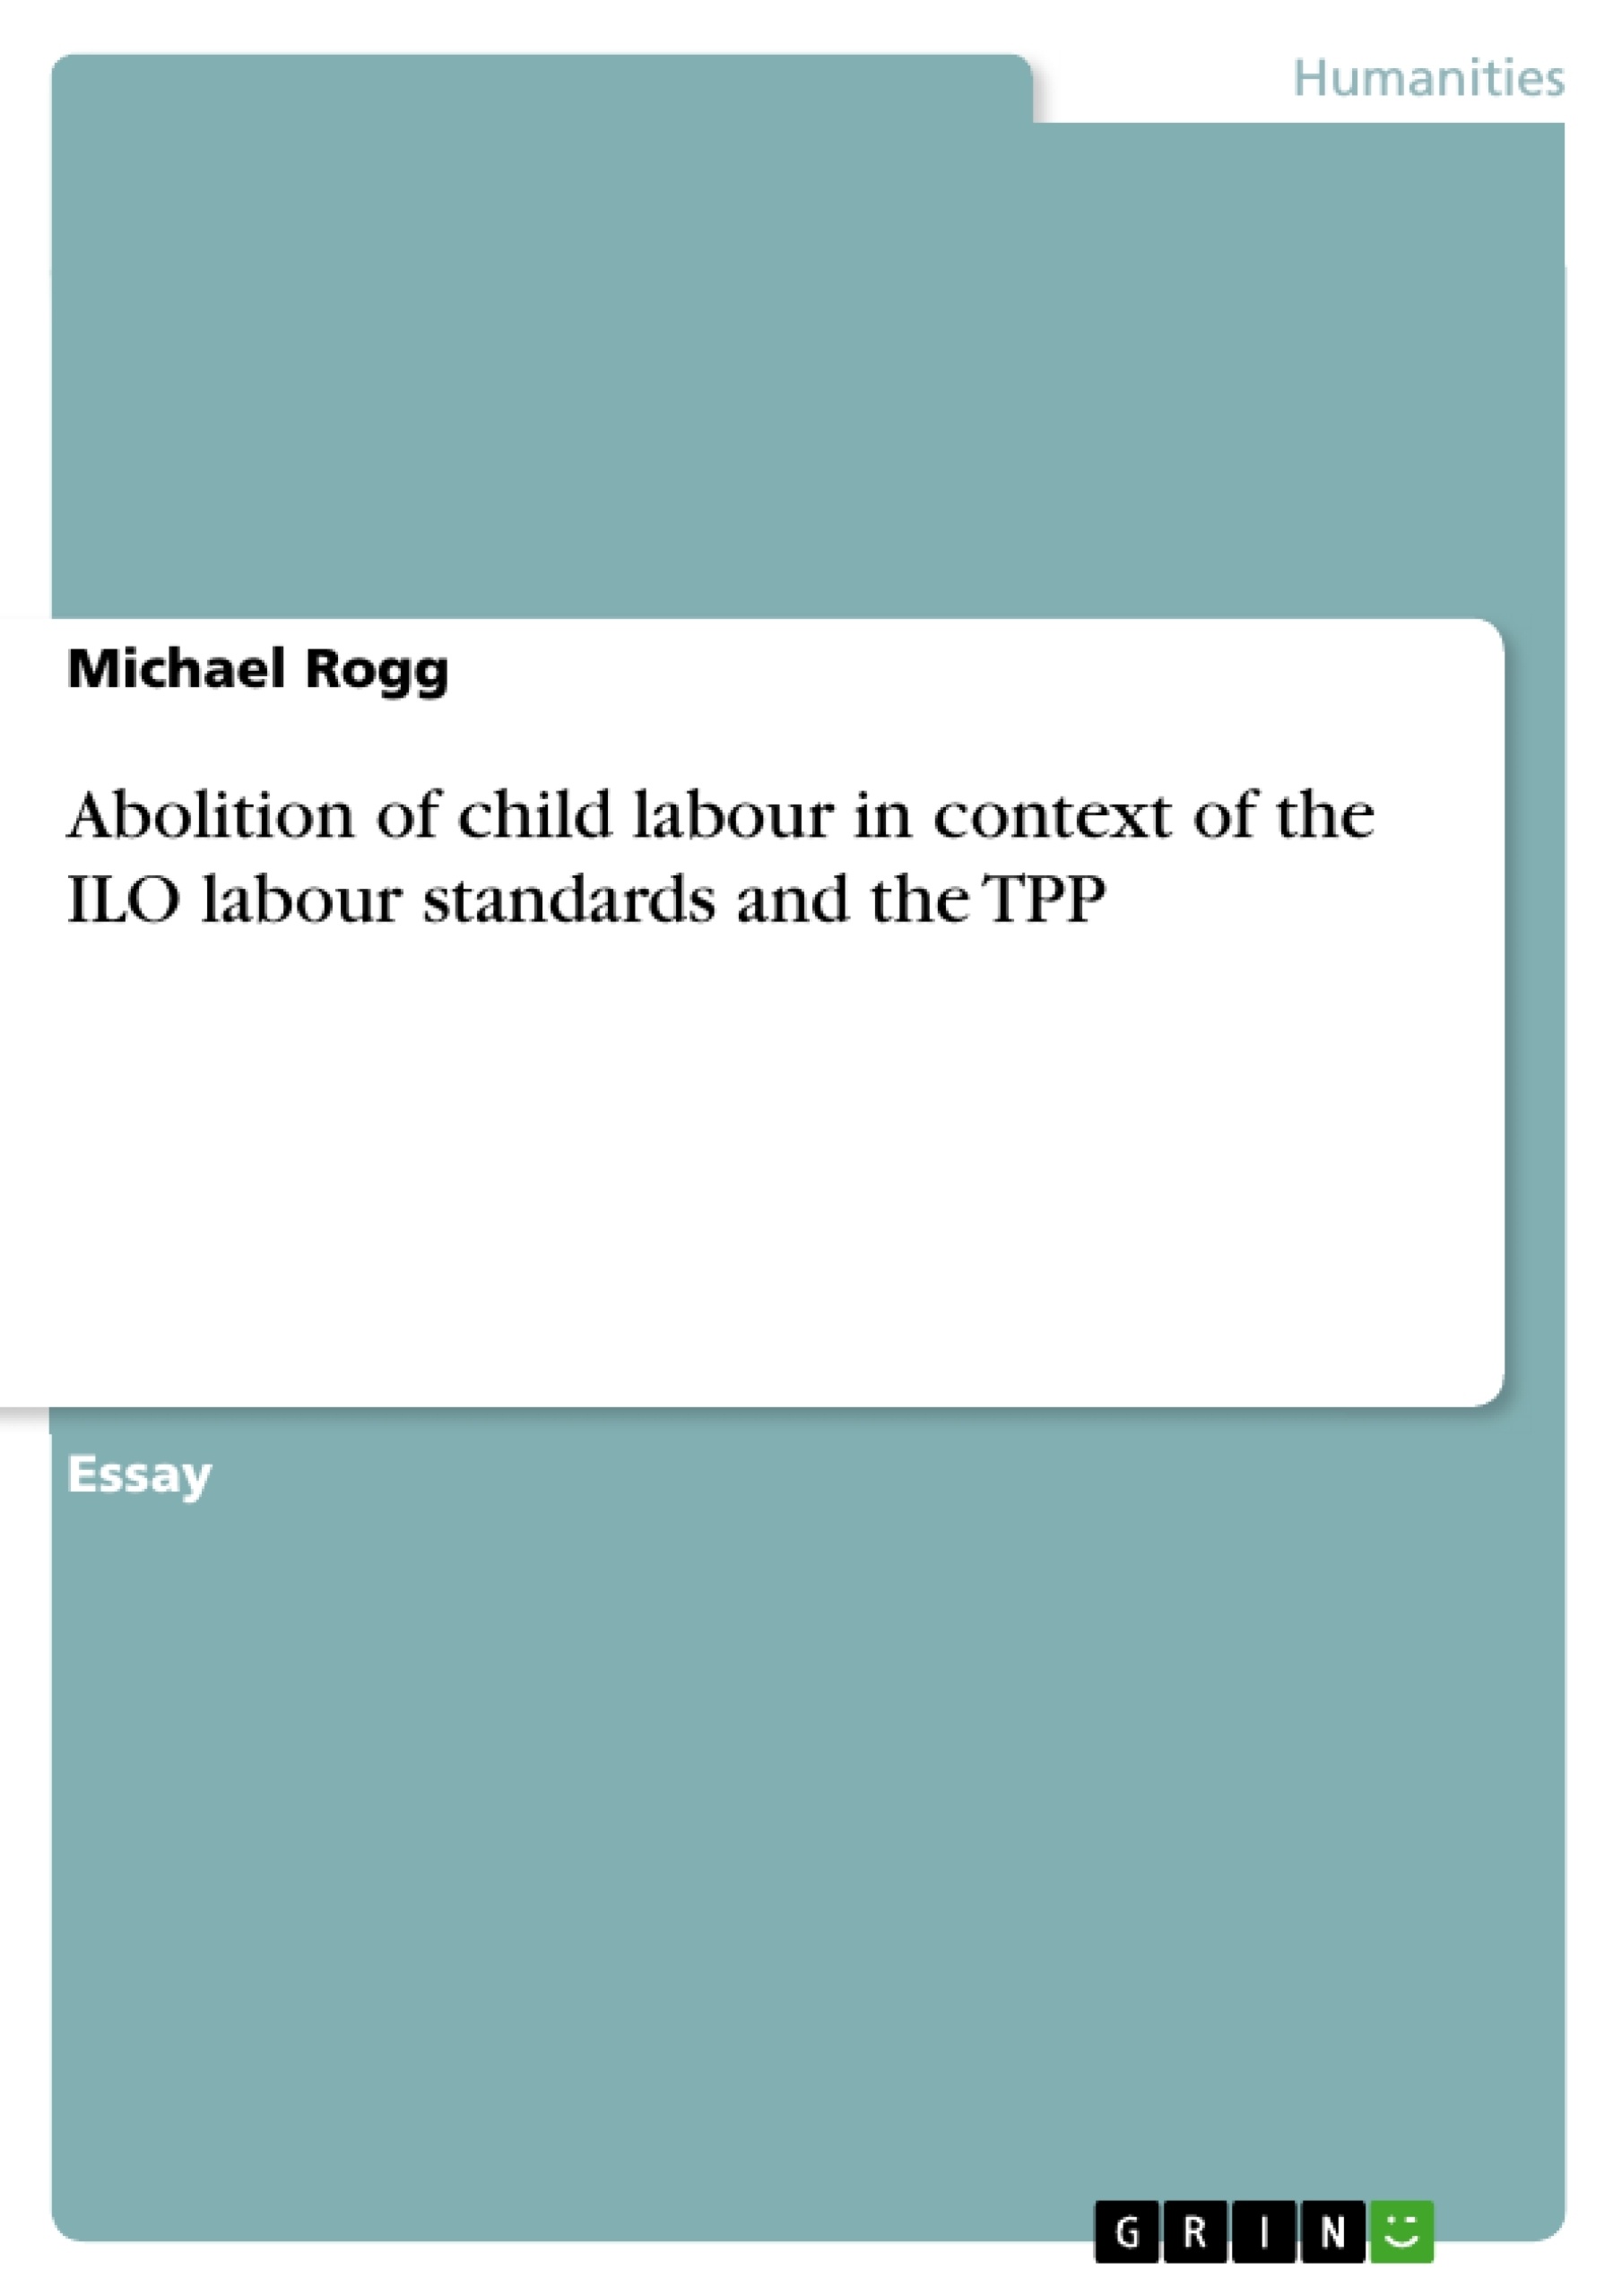 Título: Abolition of child labour in context of the ILO labour standards and the TPP